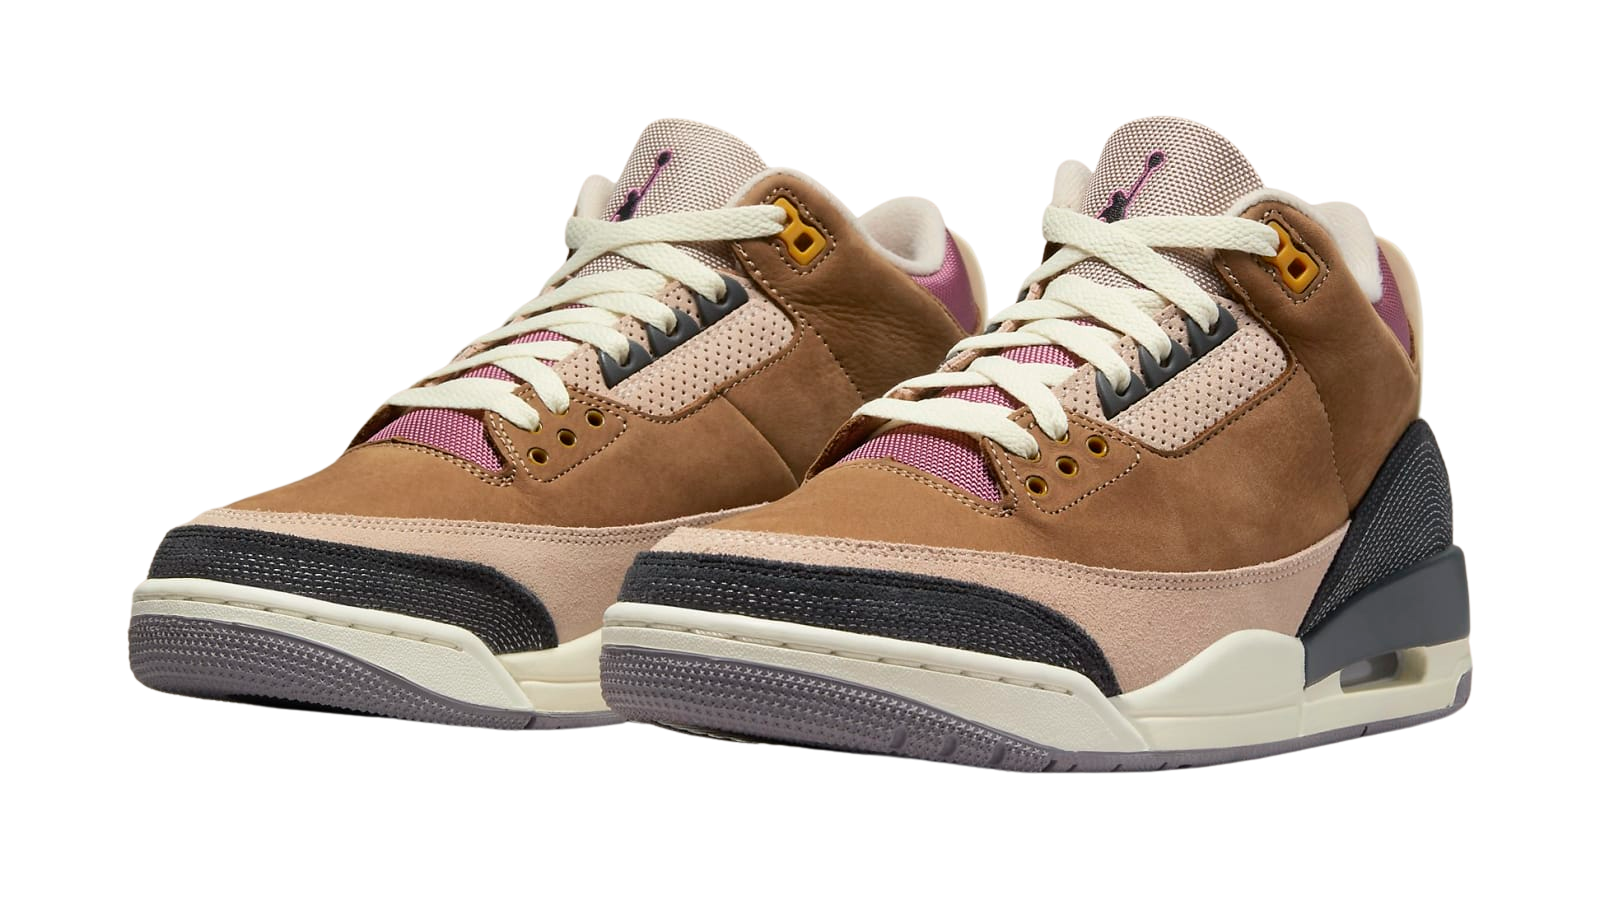 Air Jordan 3 Winterized "Archaeo Brown" Sneaker Match T-Shirts, Hoodies, and Outfits